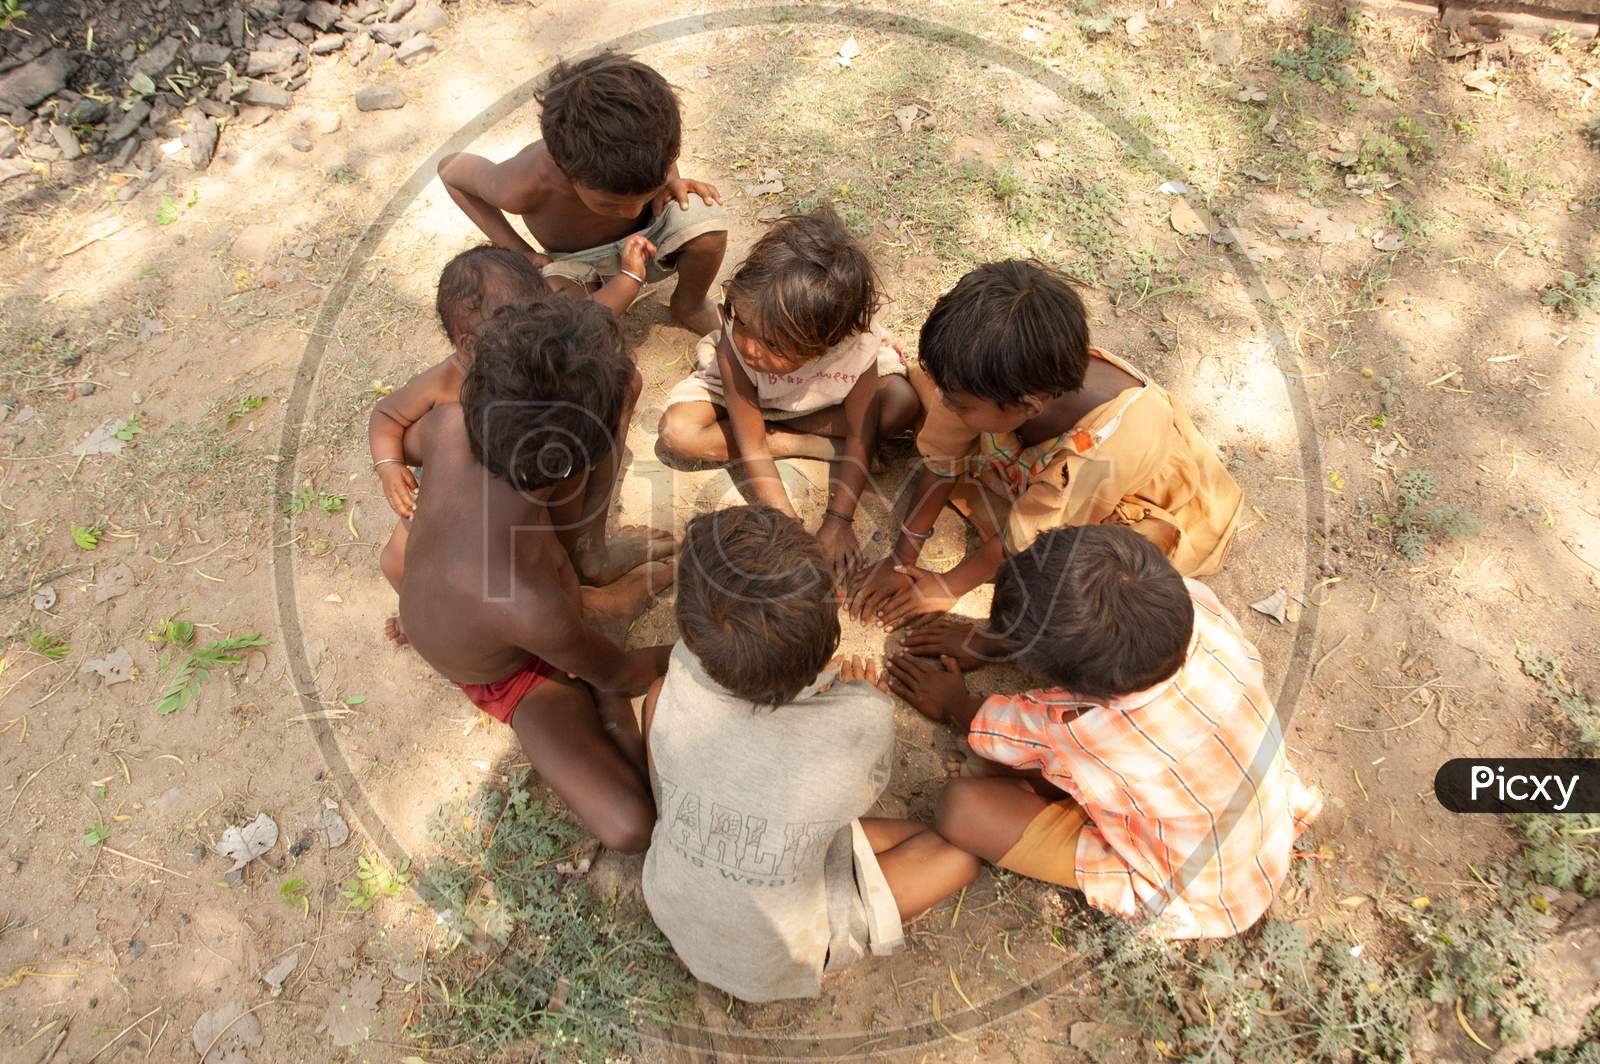 Image of Children Playing At a Rural Indian Village-EN511502-Picxy